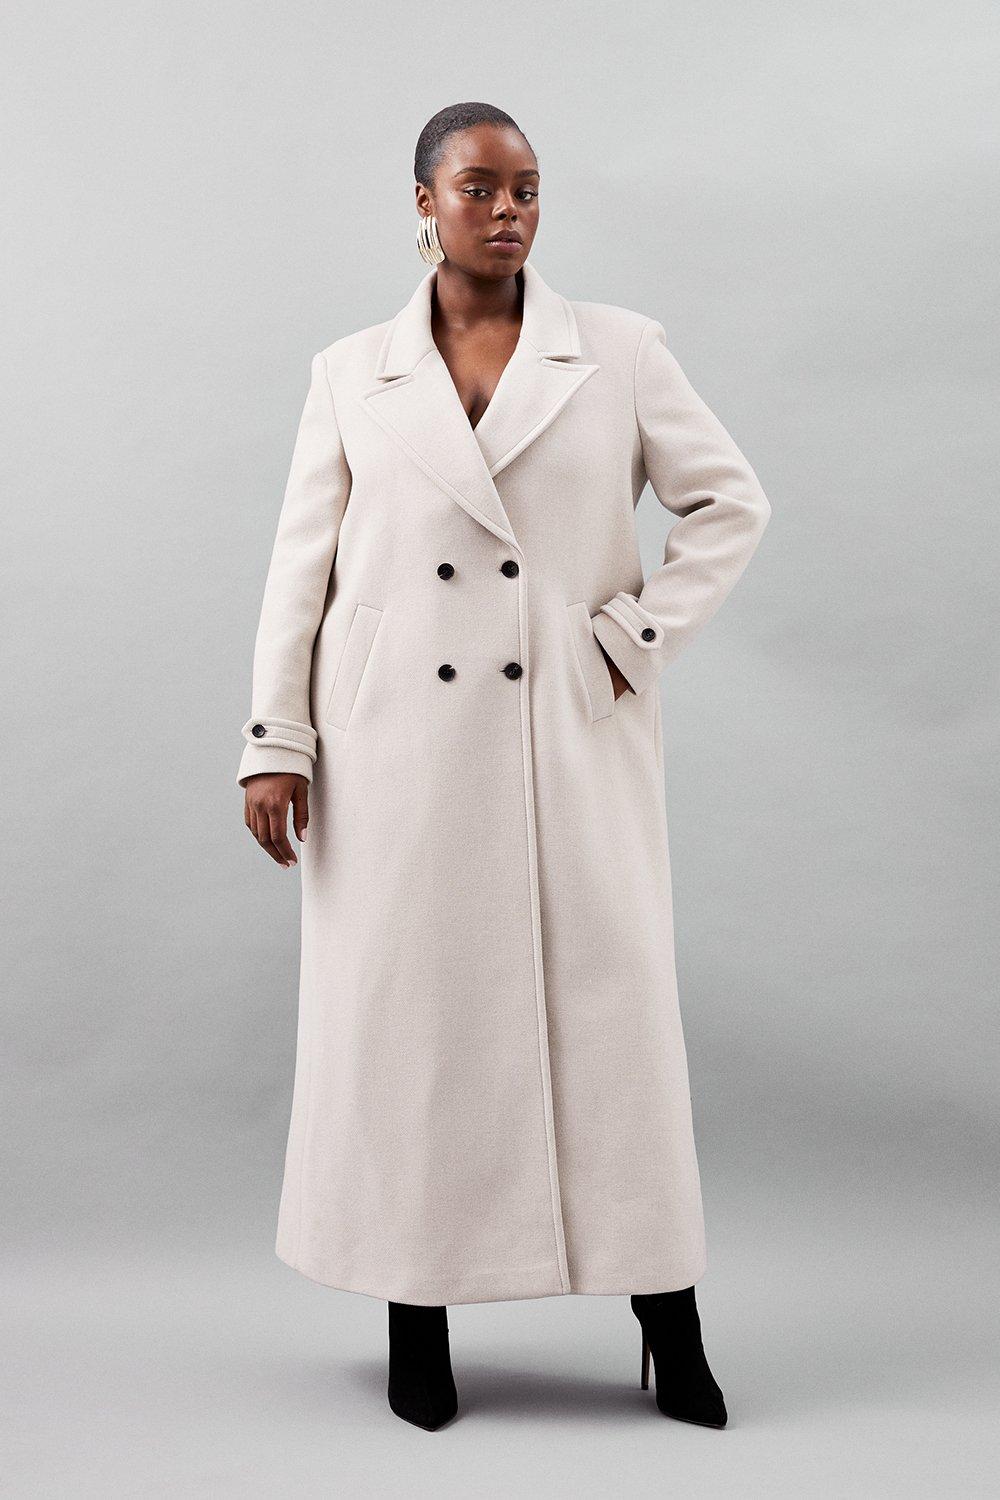 Italian Wool Cashmere Double Breasted Tailored Coat, 50% OFF